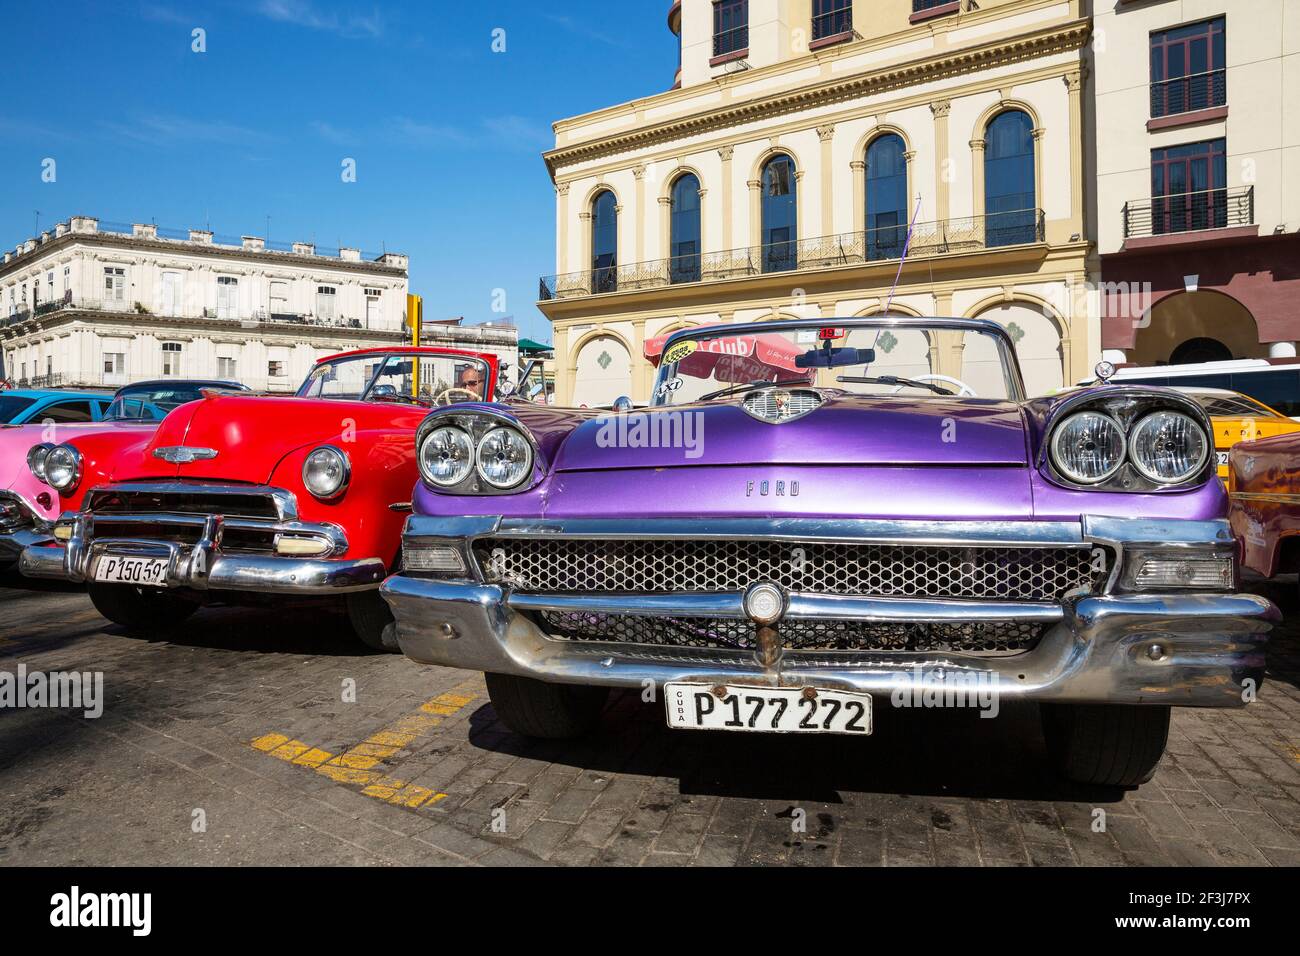 US classic cars from the 1950s can be hired for touristic city tours, Havana, Cuba Stock Photo